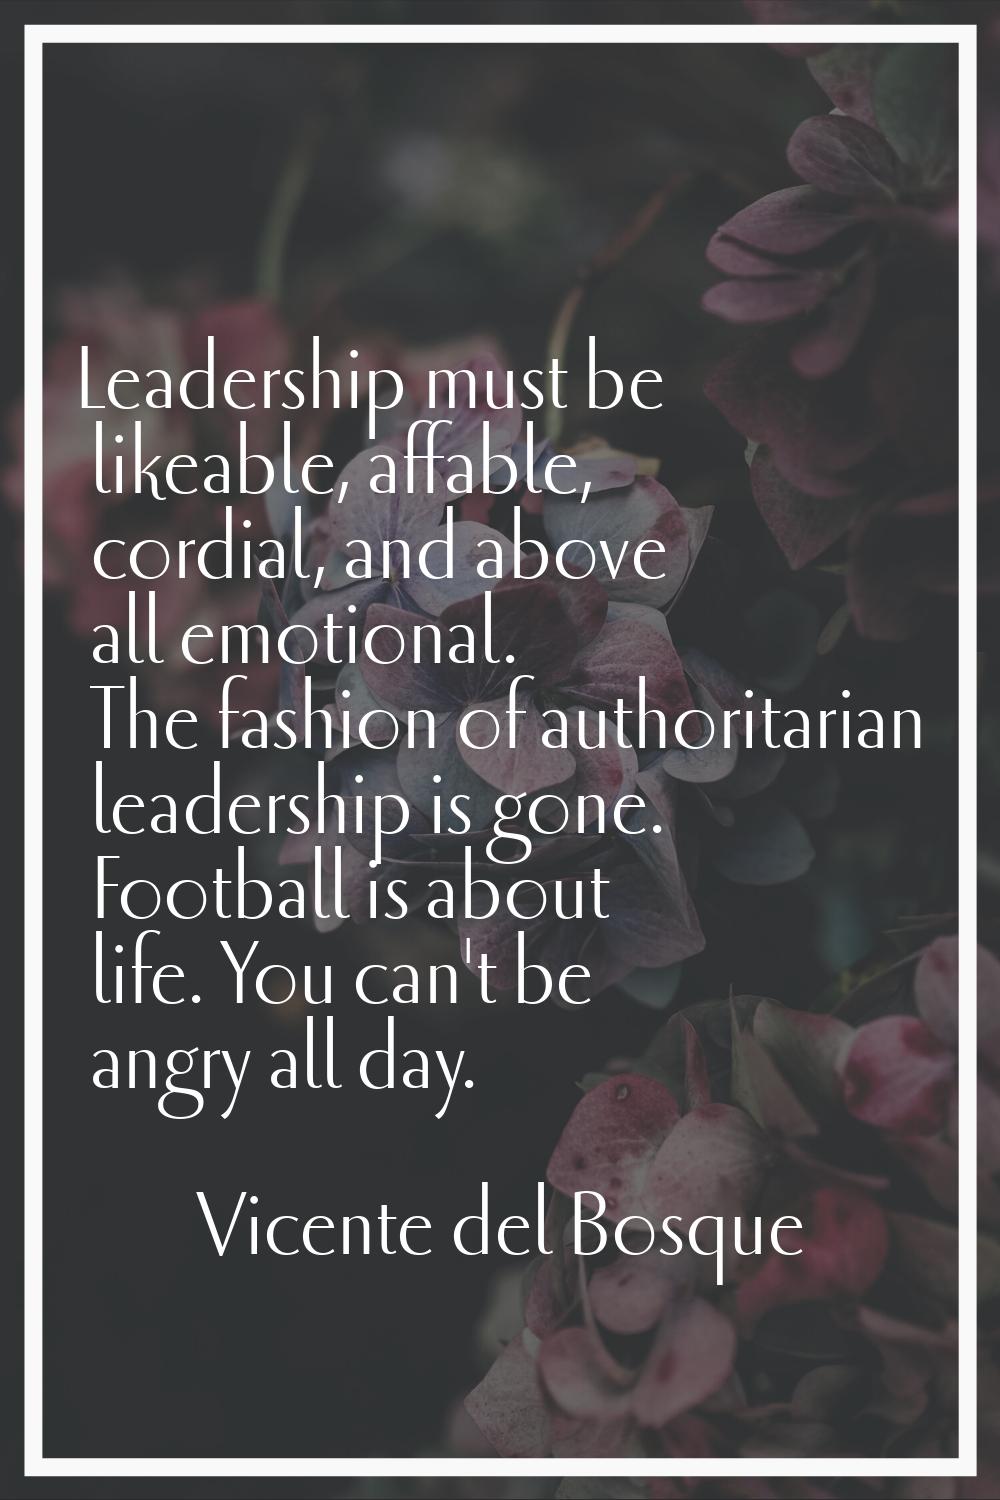 Leadership must be likeable, affable, cordial, and above all emotional. The fashion of authoritaria